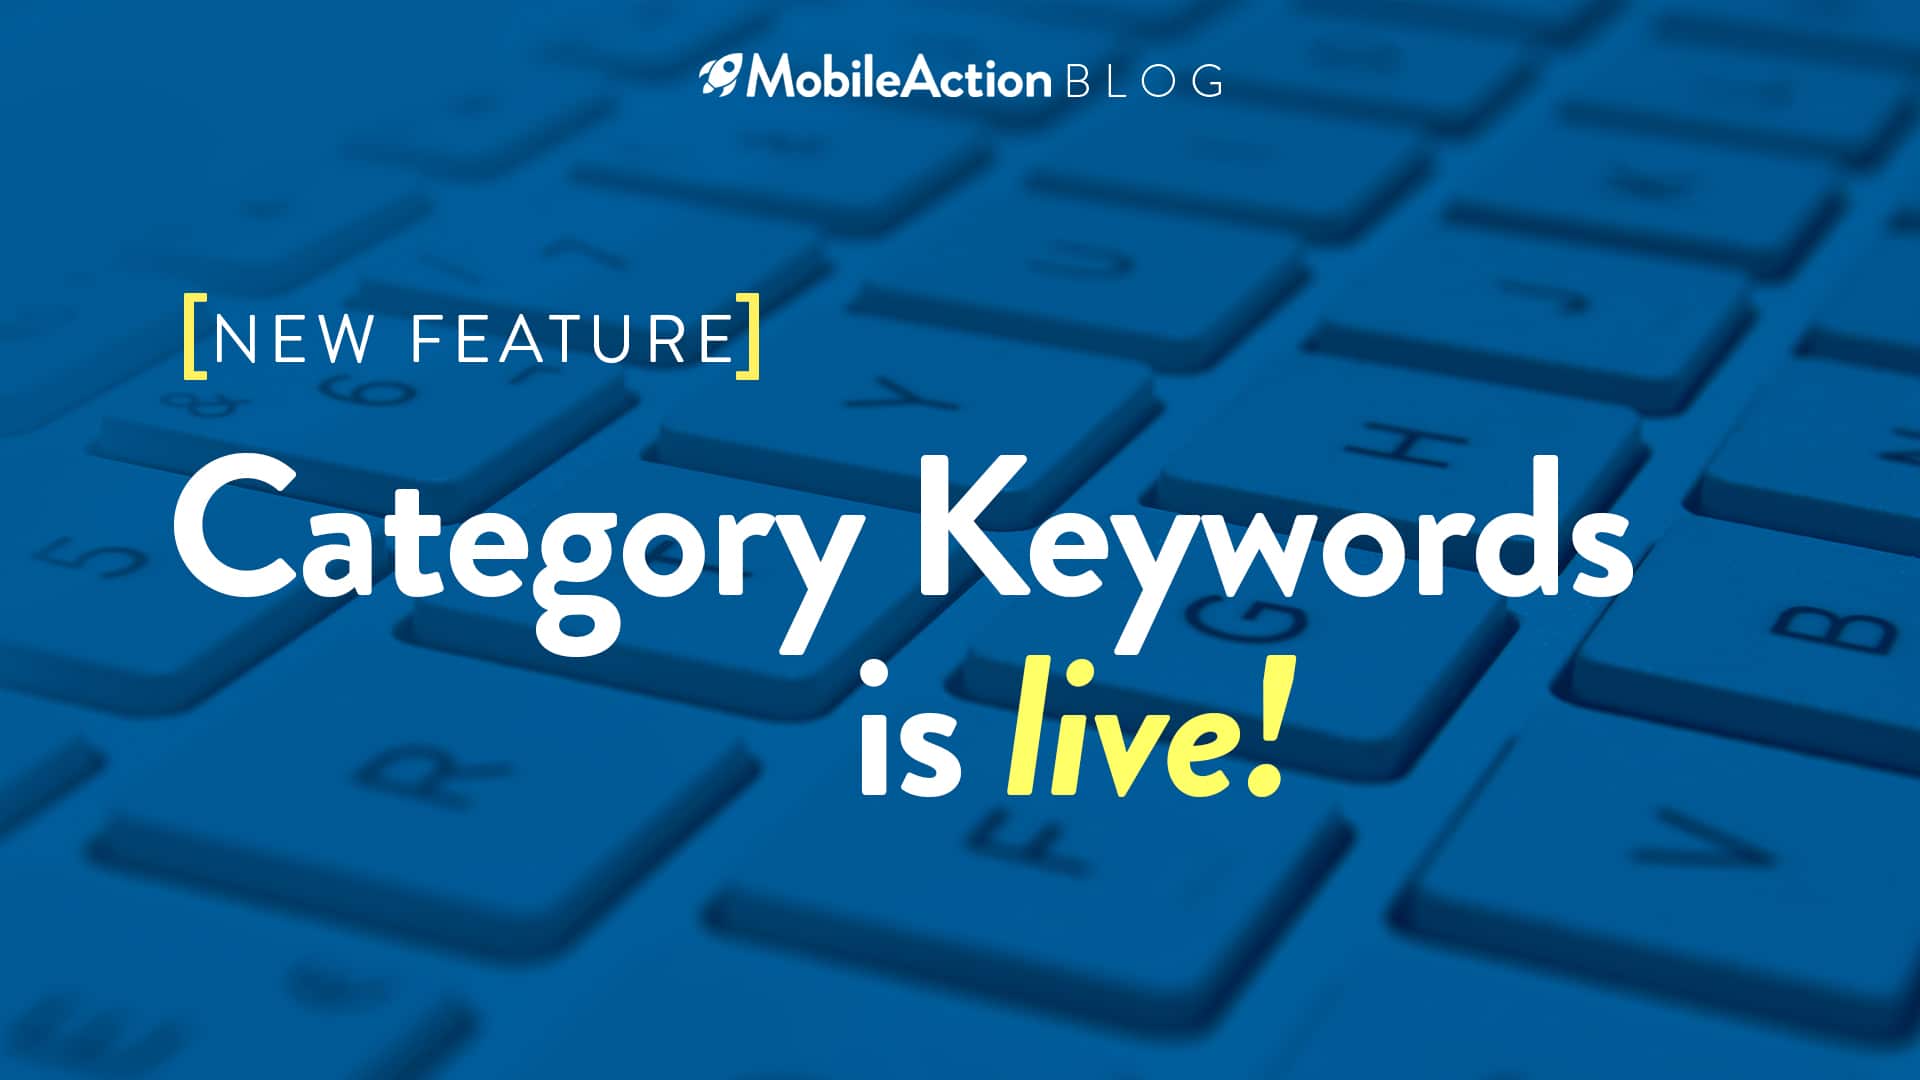 [New Feature] Category Keywords is live!